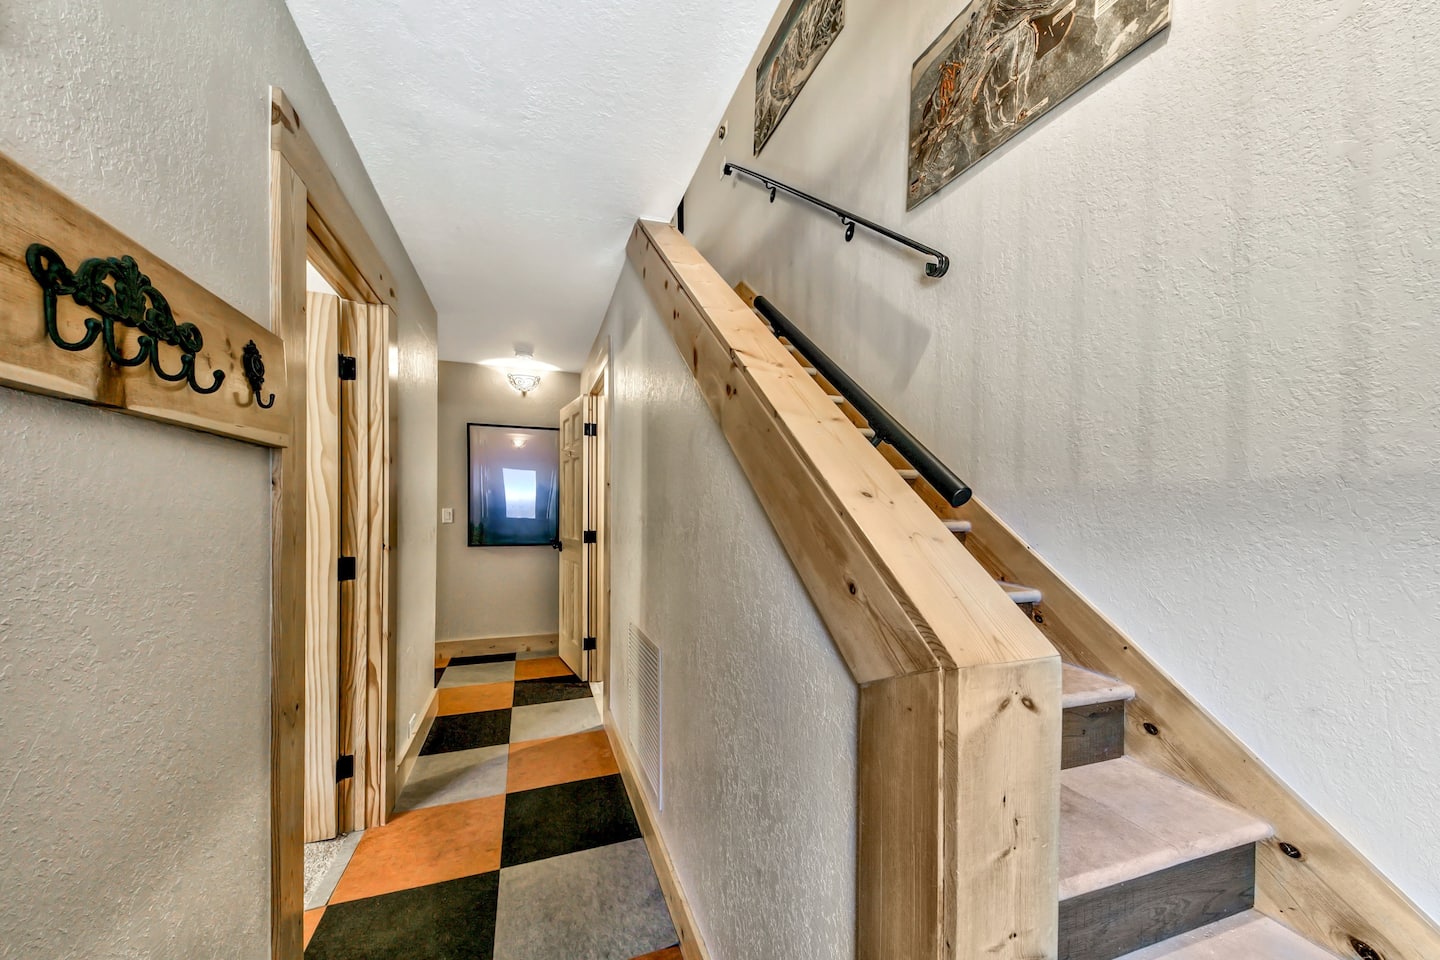 northstar vacation rental condo aspen grove hall and stairs